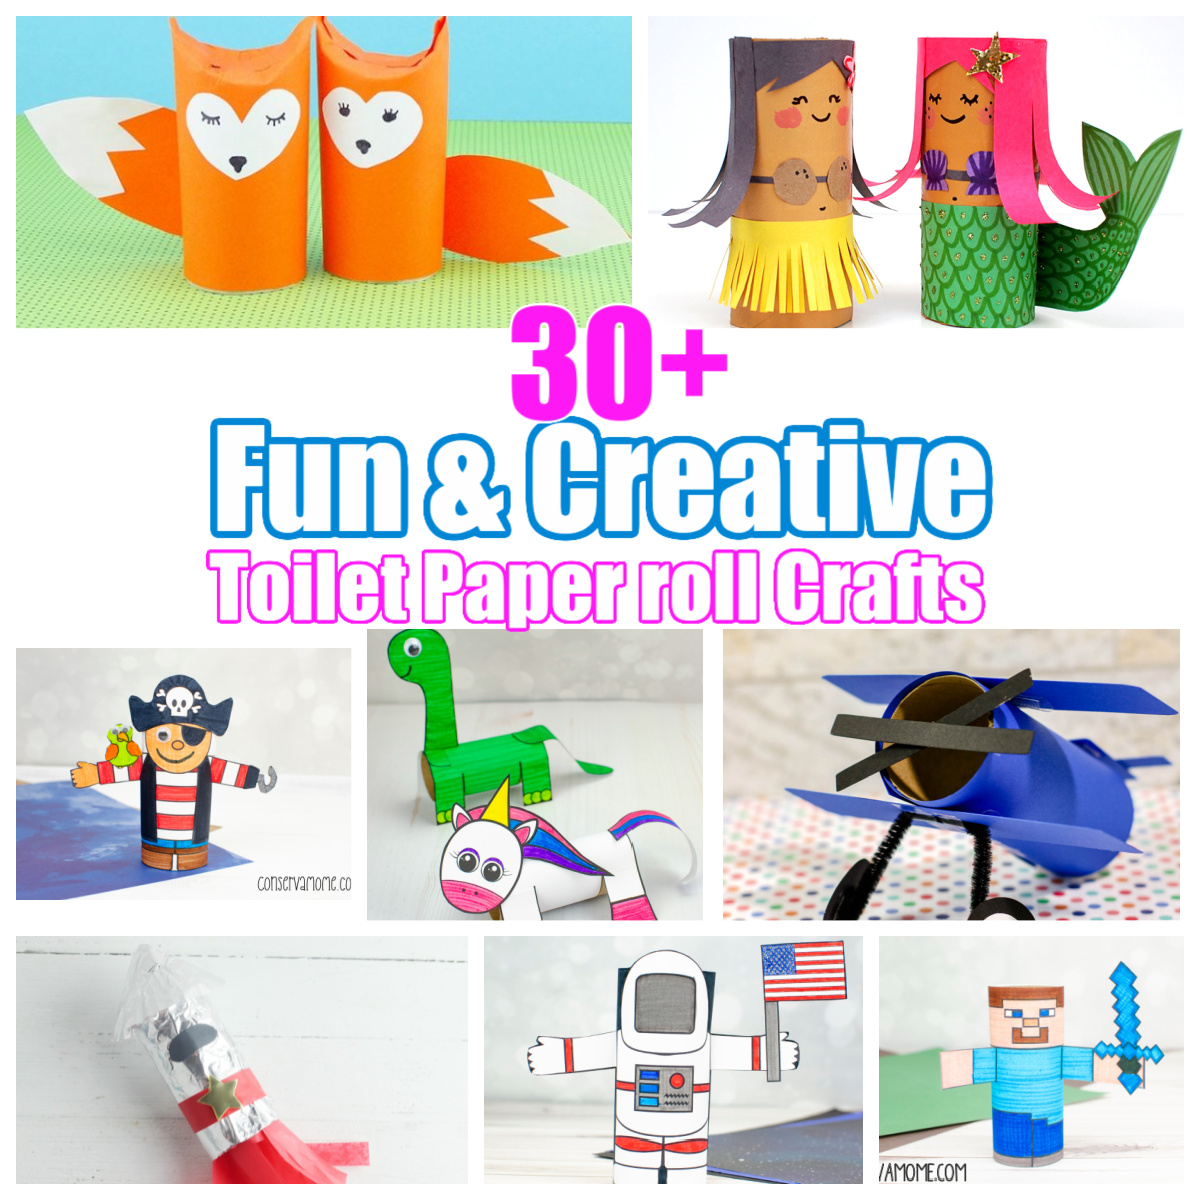 Toilet Paper Roll Crafts for Kids